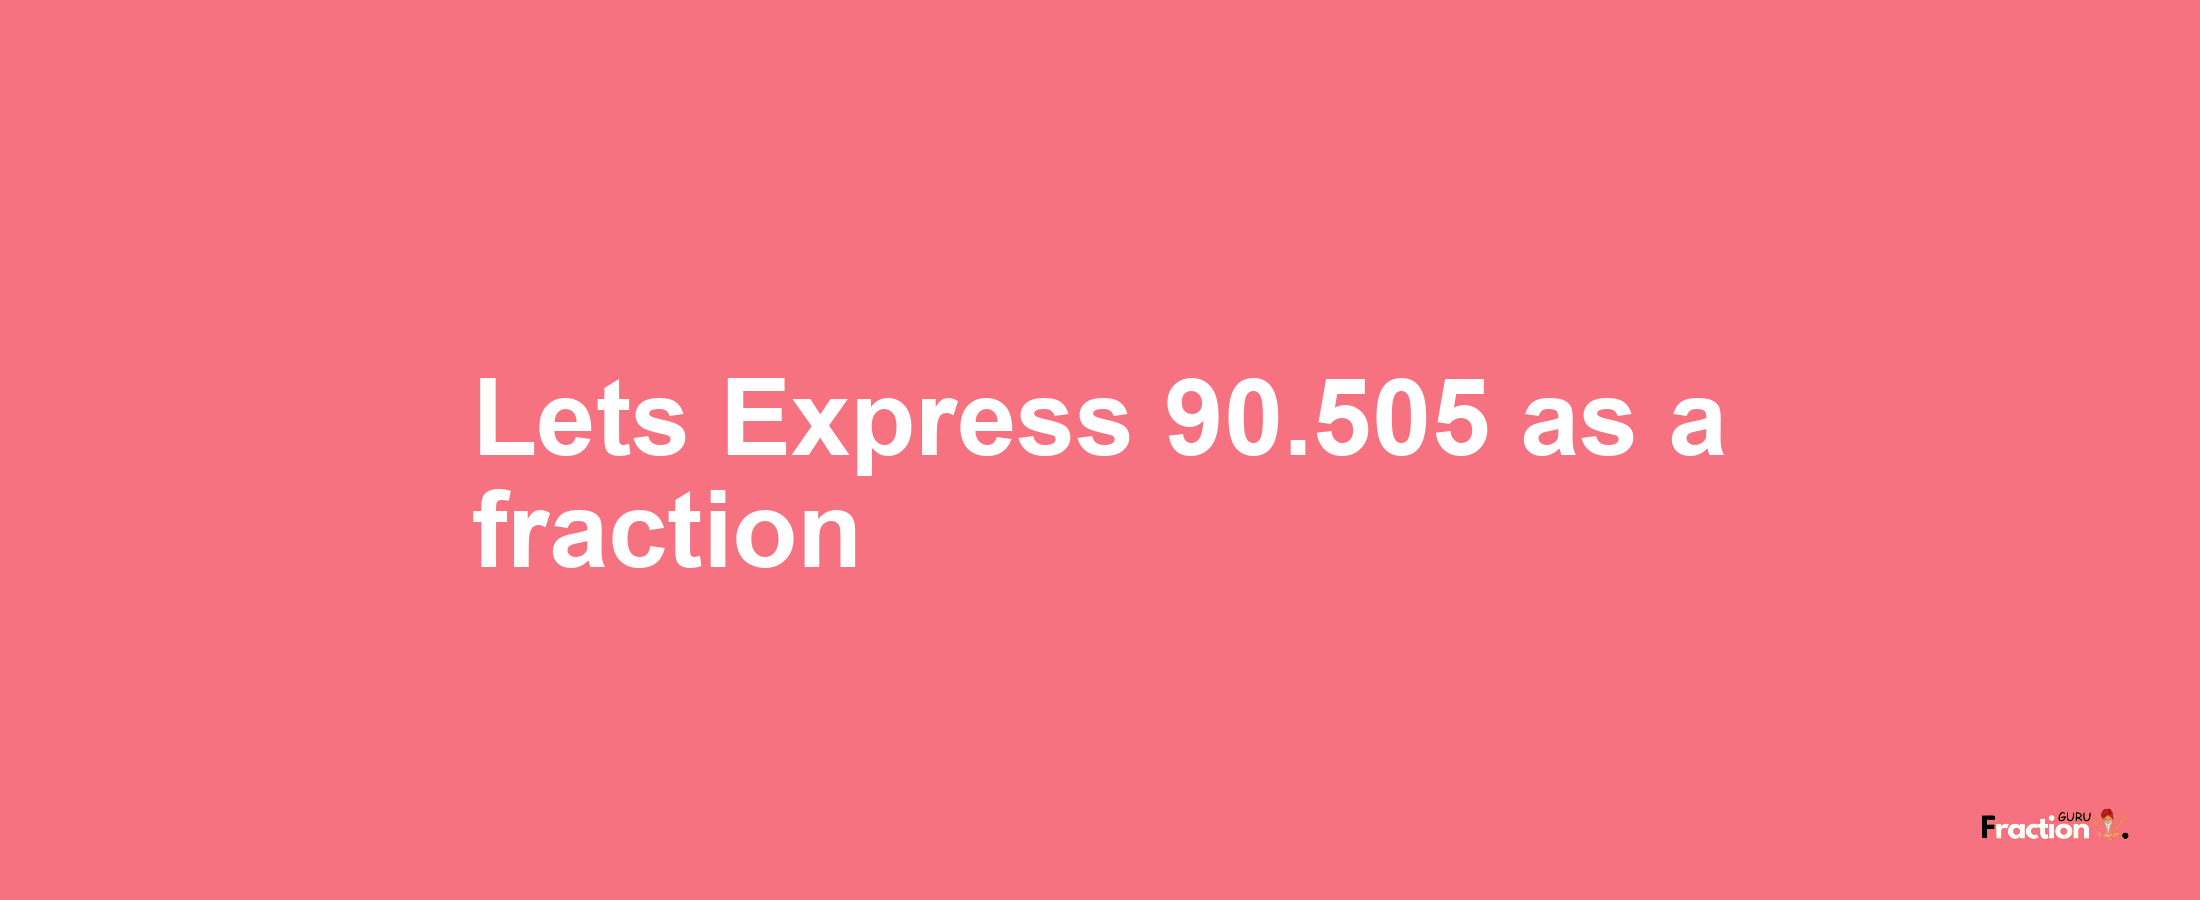 Lets Express 90.505 as afraction